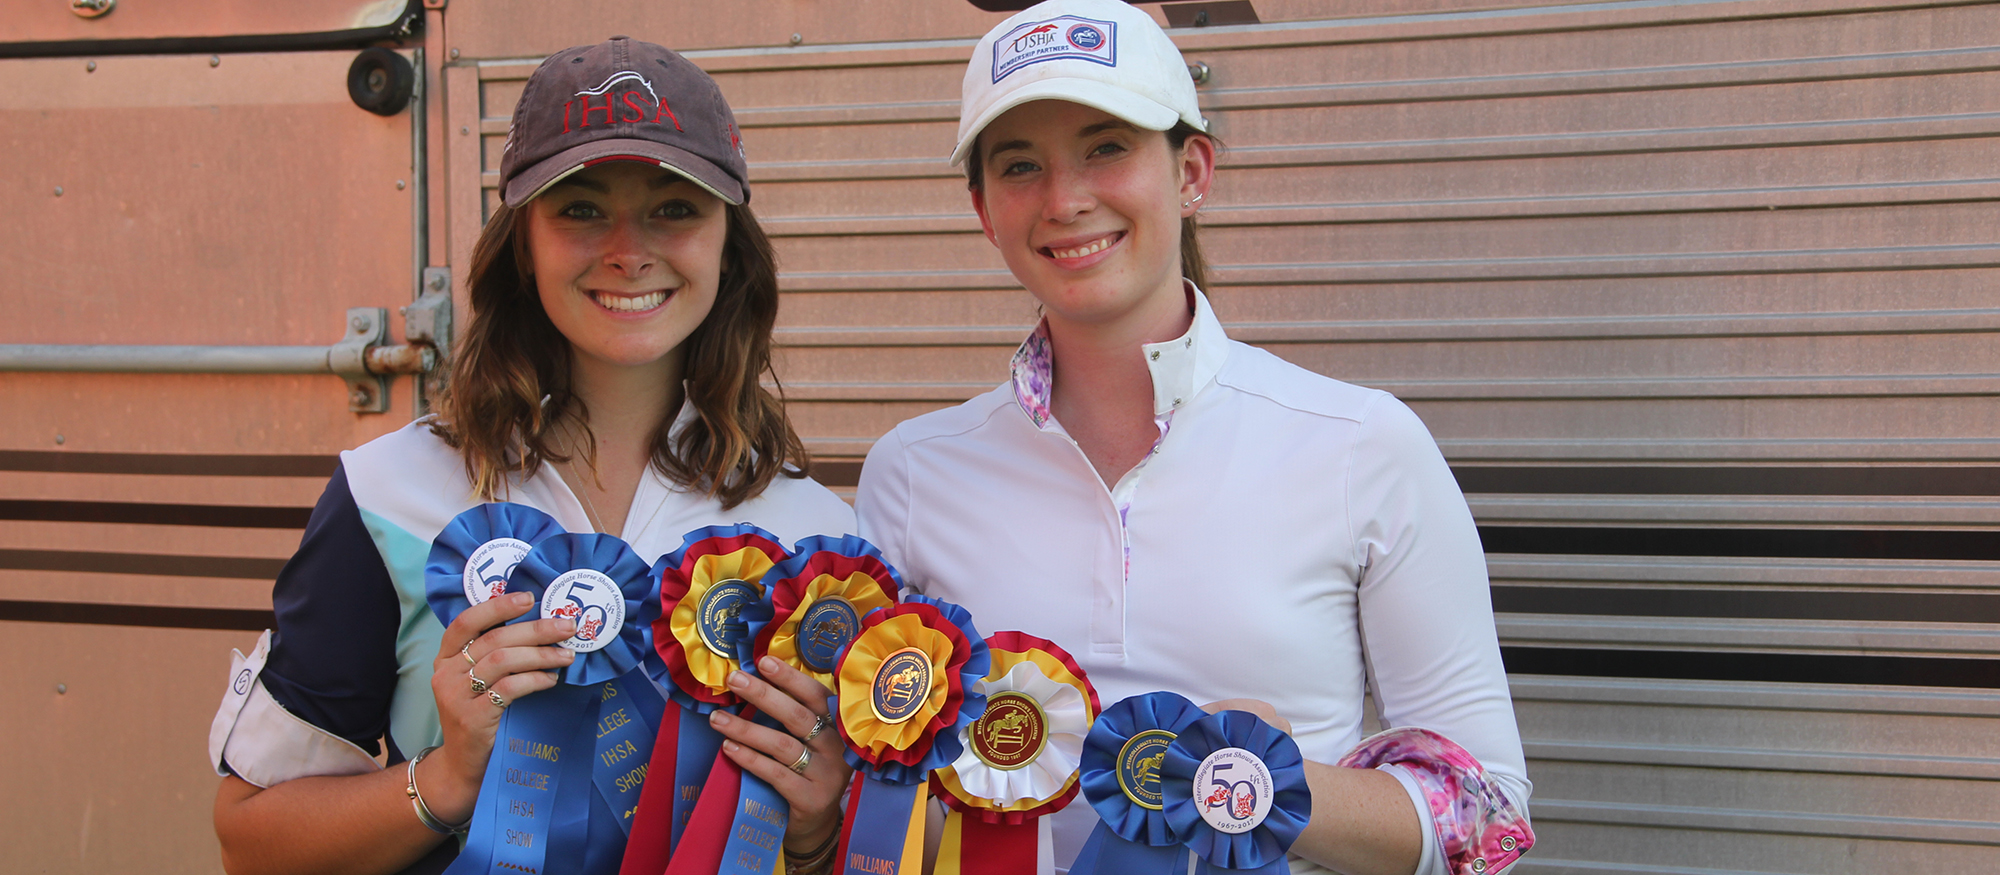 Photo of Lyons riders Sabrina Fox and Anna Rzchowski  displaying their ribbons from MHC's win at the Williams Show on October 14, 2017.